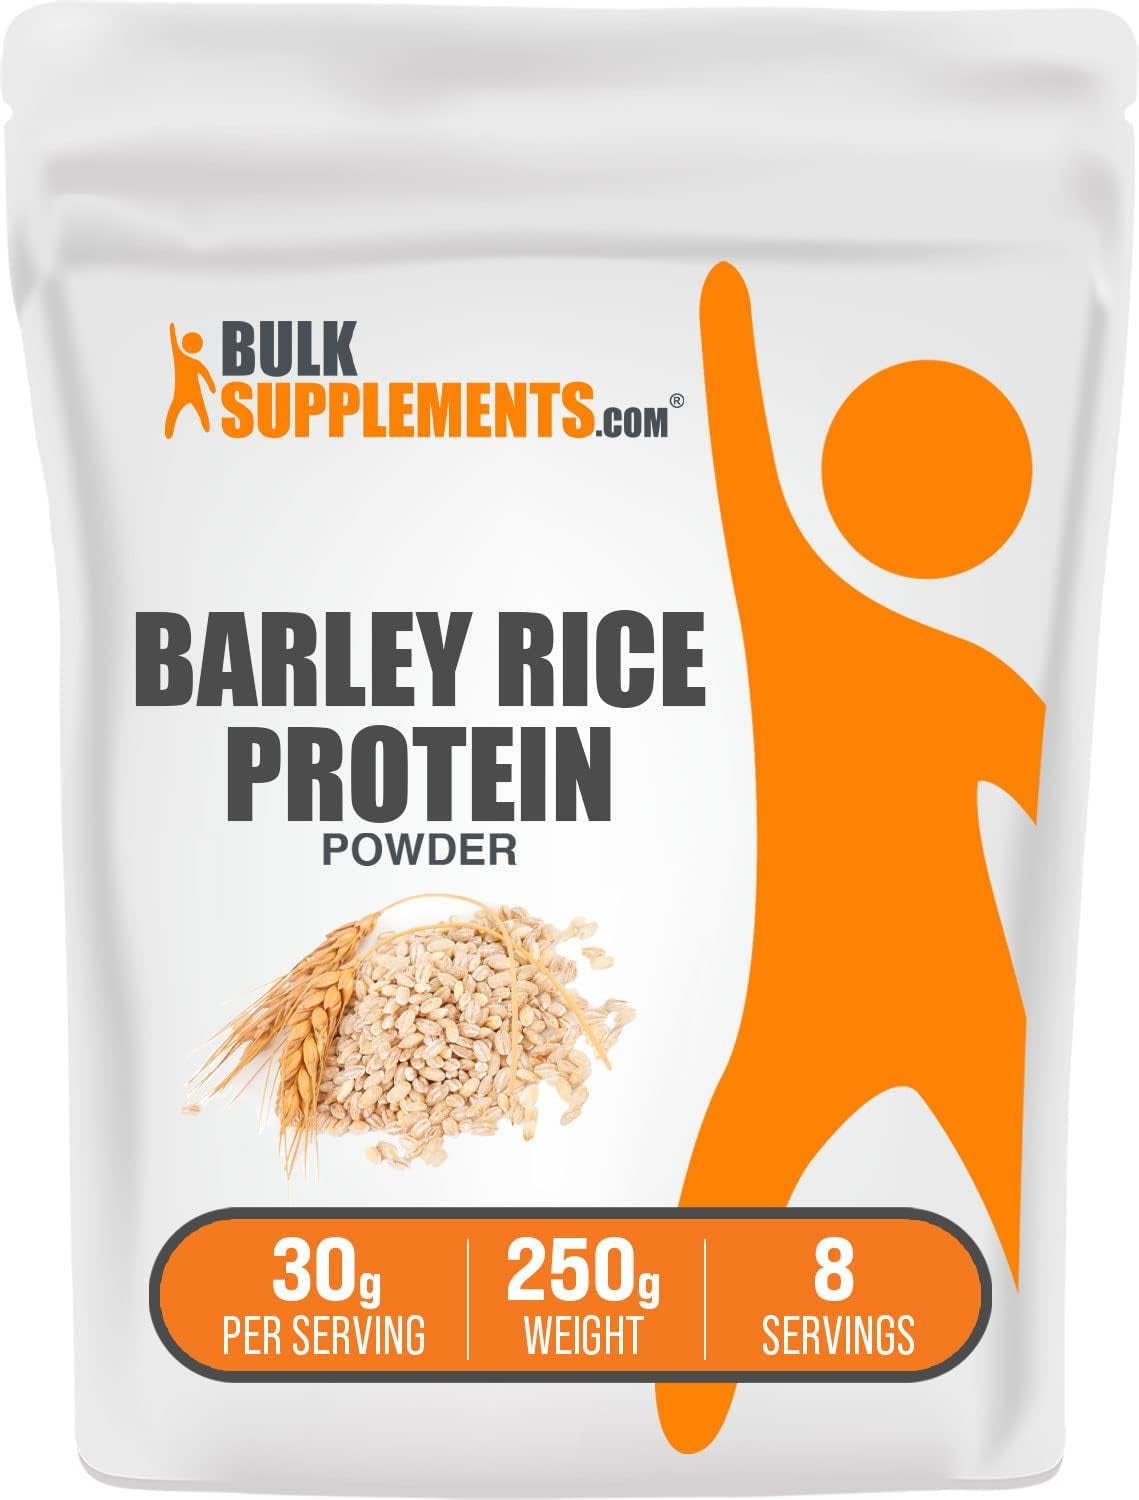 BULKSUPPLEMENTS.COM Barley Rice Protein Powder - Post-Workout Muscle Builder - Dairy Free, Soy Free - 30 Grams per Serving (250 Grams - 3.5 Oz)